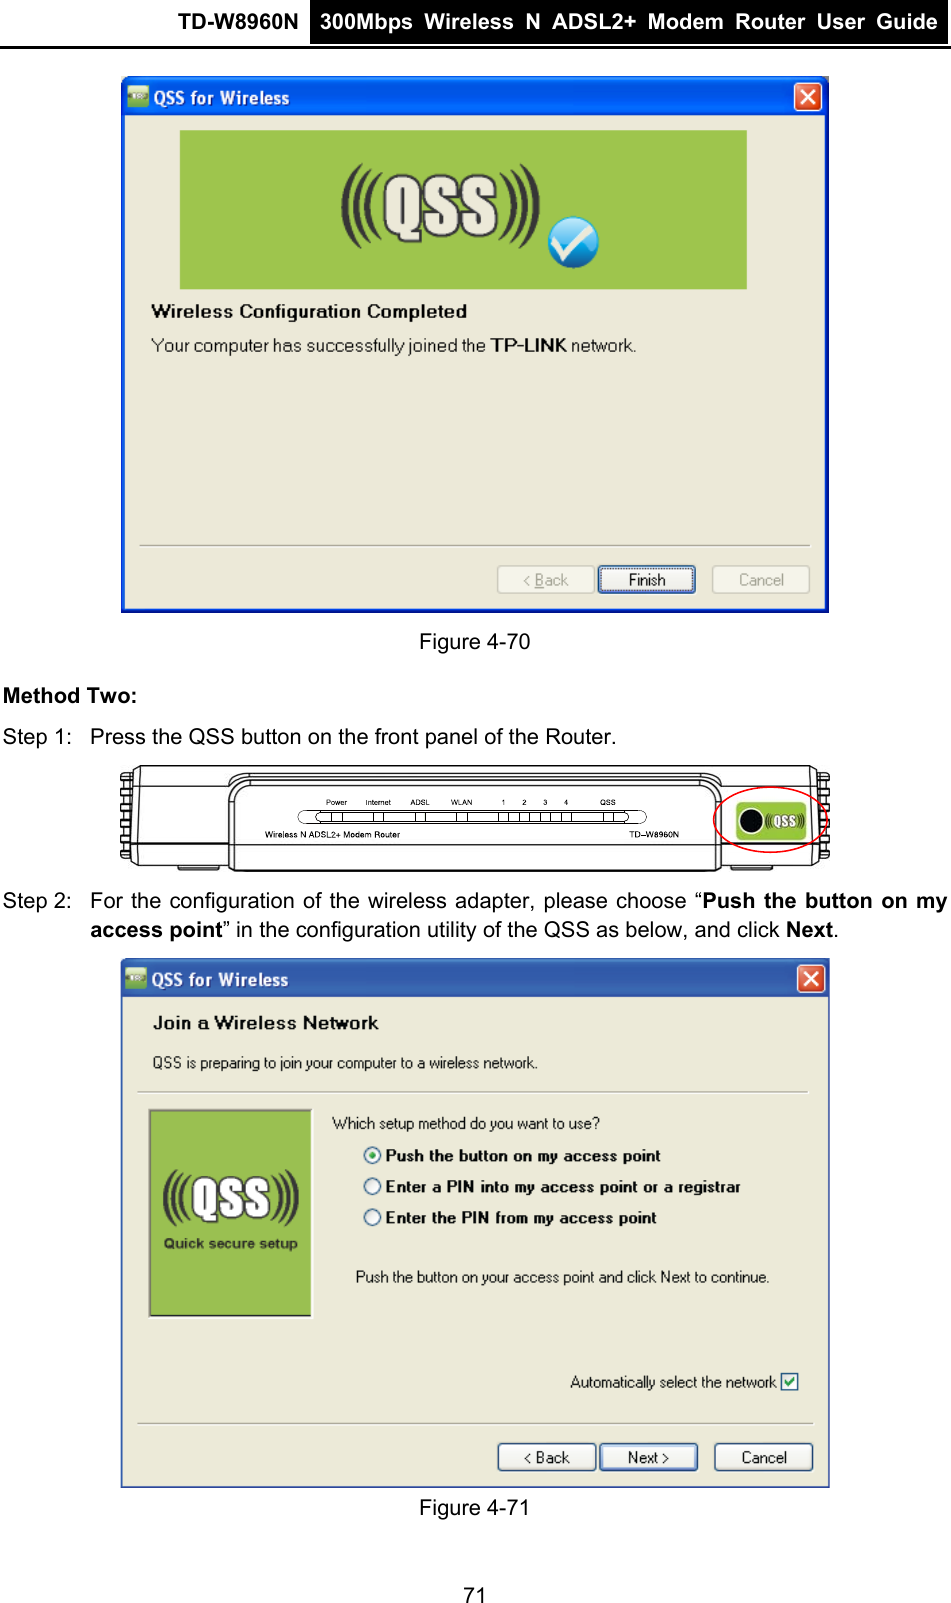 TD-W8960N  300Mbps Wireless N ADSL2+ Modem Router User Guide   Figure 4-70 Method Two: Step 1:  Press the QSS button on the front panel of the Router.  Step 2:  For the configuration of the wireless adapter, please choose “Push the button on my access point” in the configuration utility of the QSS as below, and click Next.   Figure 4-71 71 